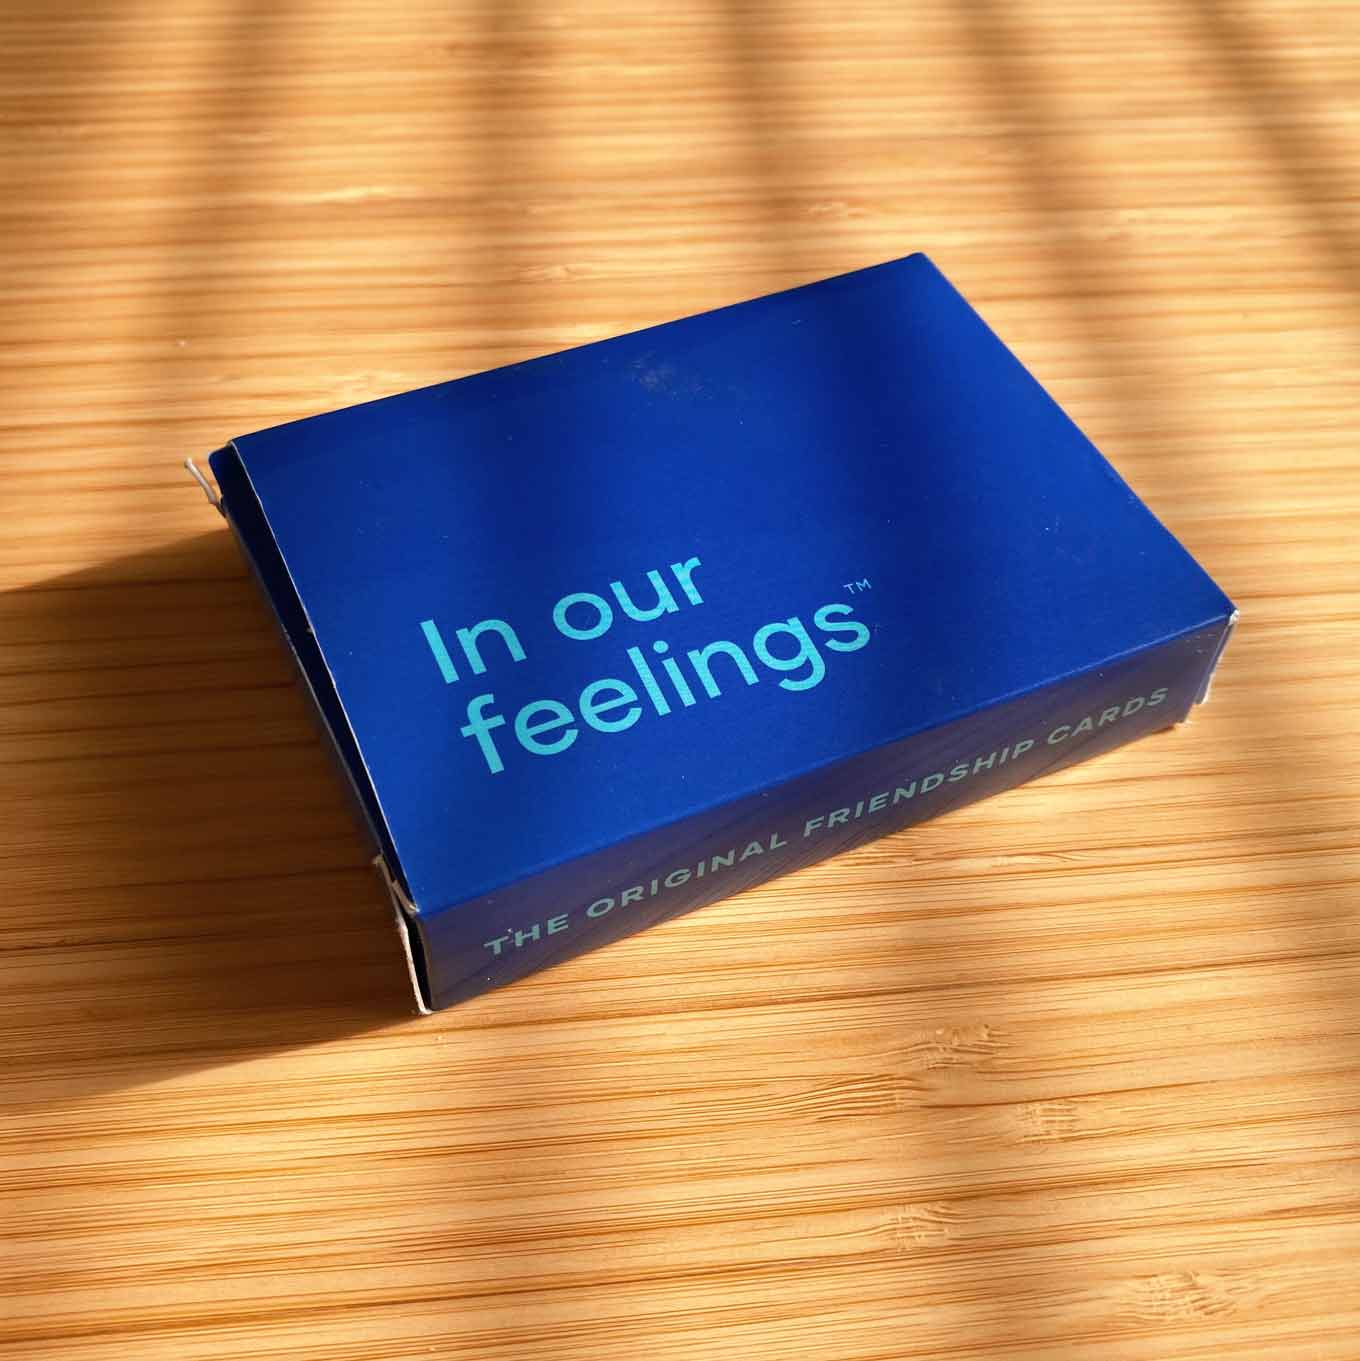 Blue box for a deck of cards, with the words In Ou Feelings: The Original Friendship Cards